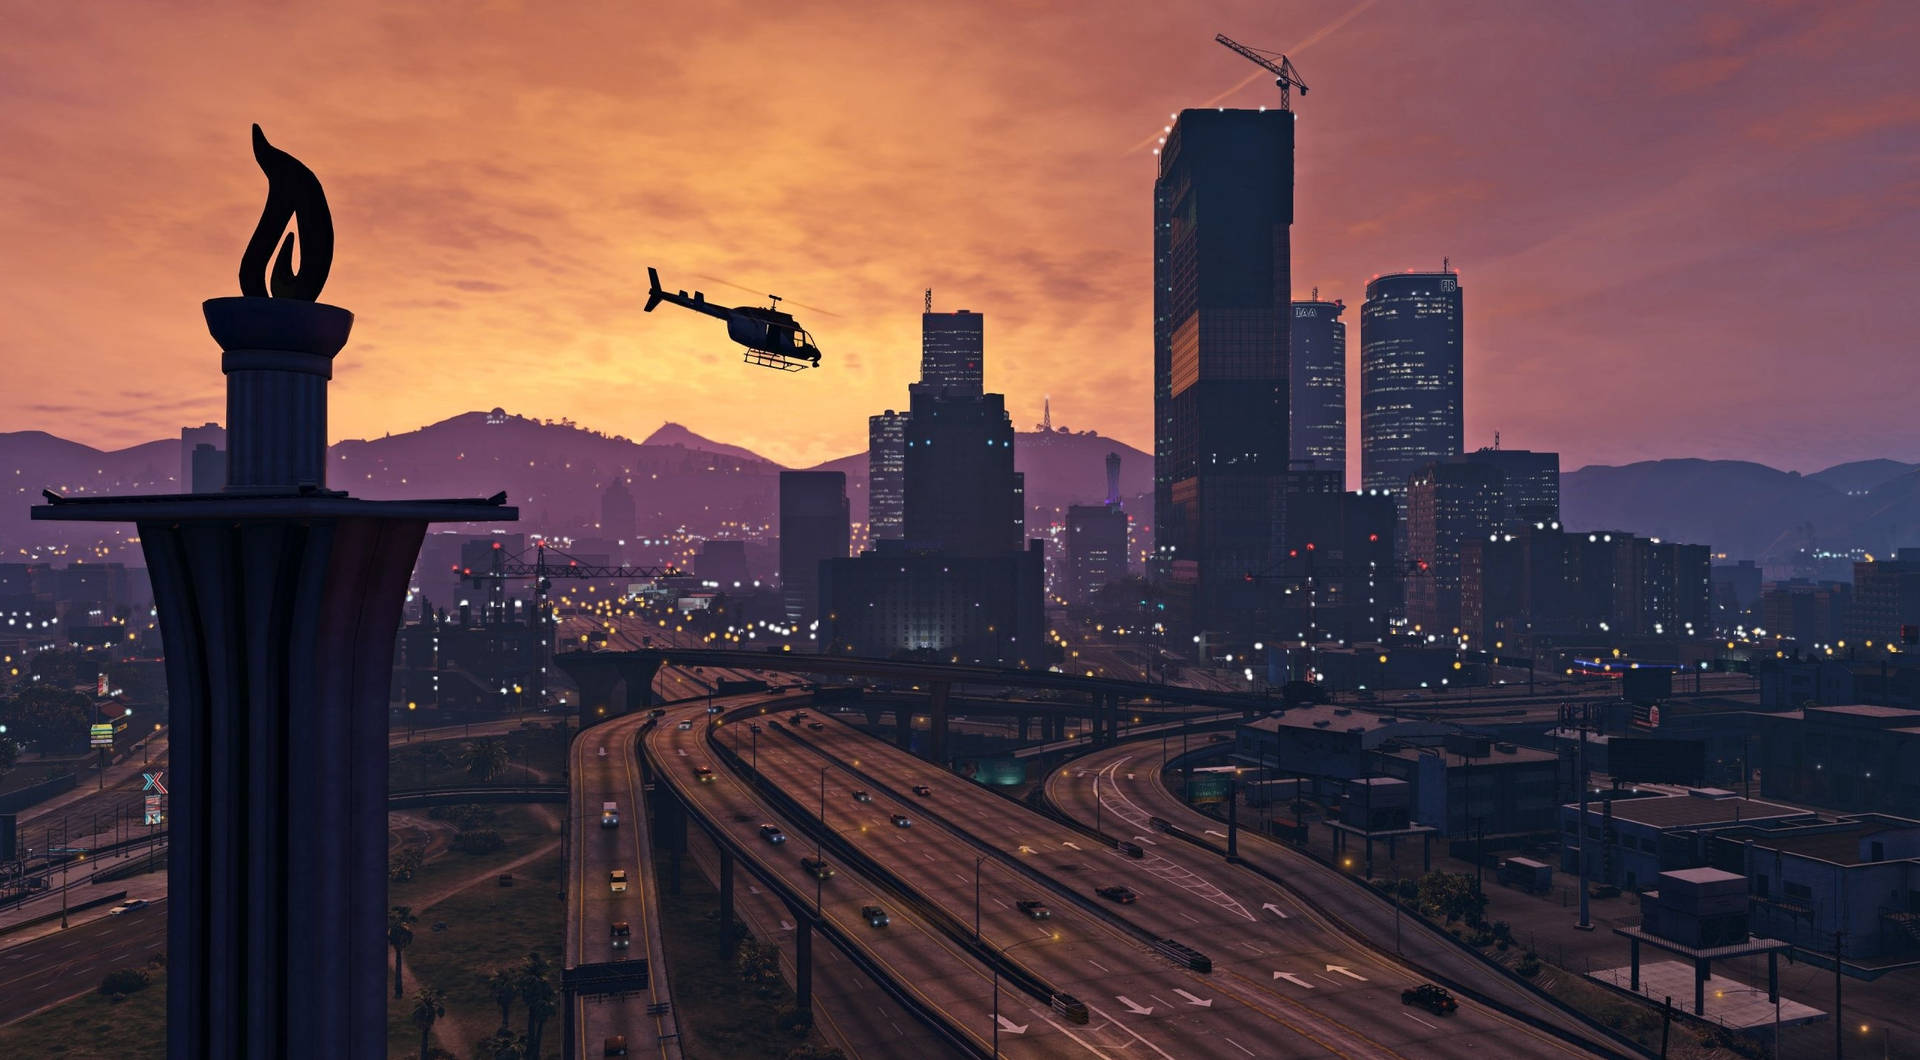 Gta 5 2560x1440 Surveilling Helicopter Picture